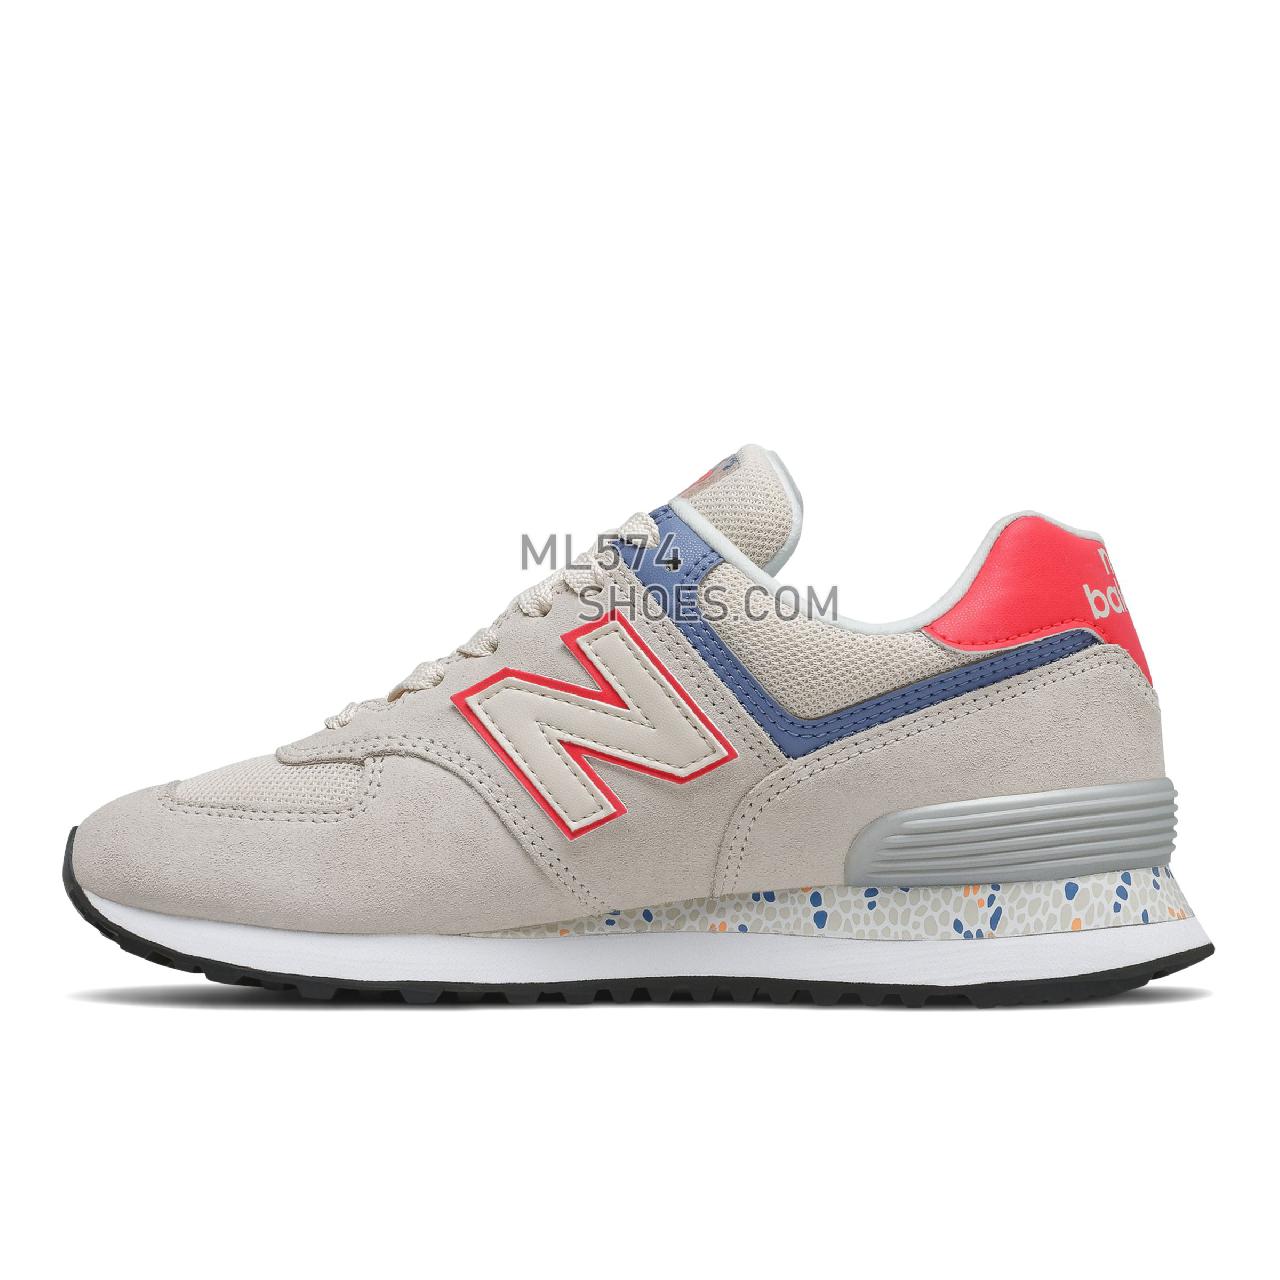 New Balance 574 - Women's Classic Sneakers - Raw Silk with Vivid Coral - WL574CL2